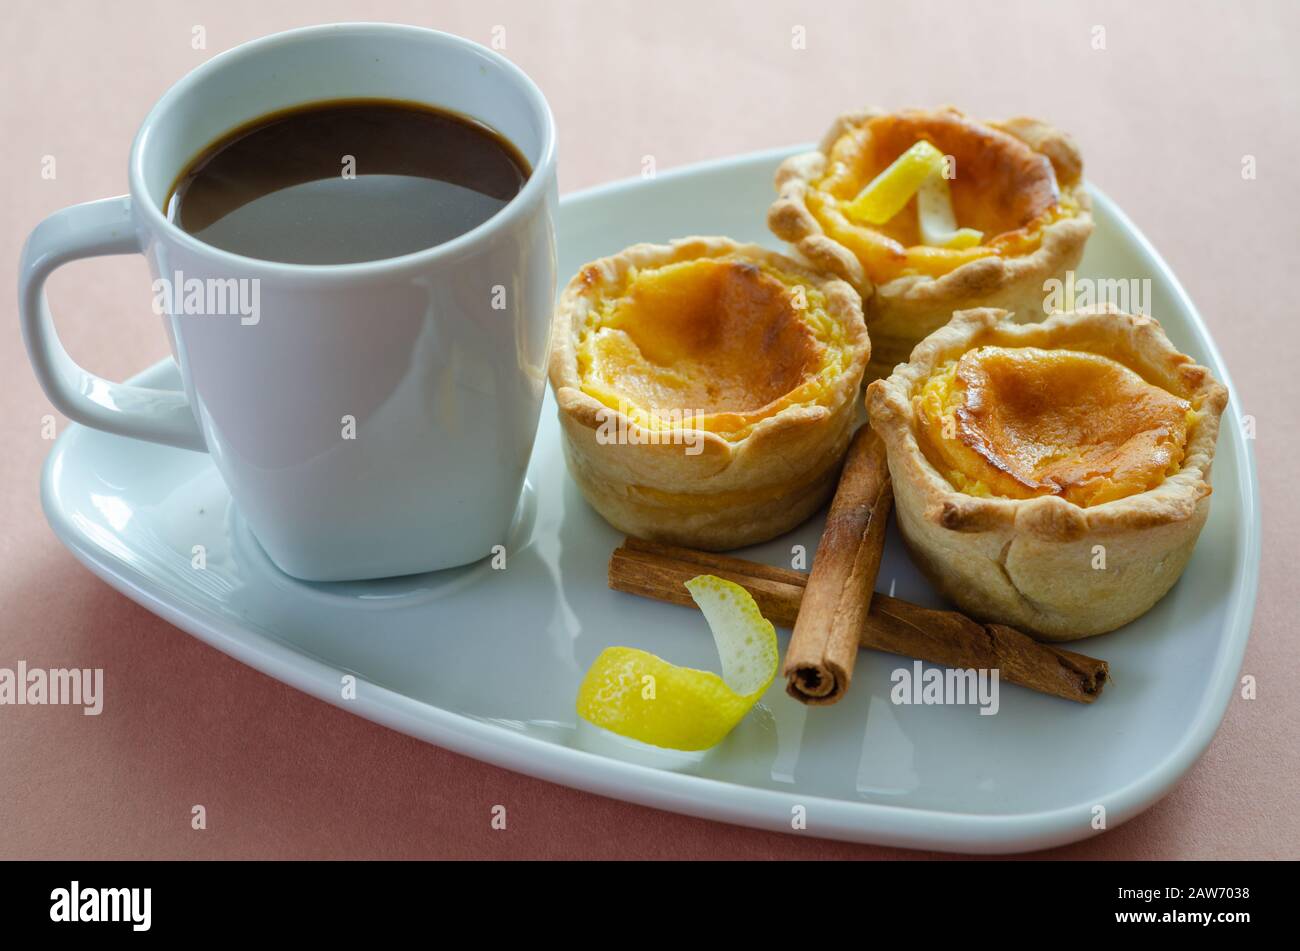 Portuguese egg tart pastry Pastel de nata on a plate with a cup of black coffee Stock Photo